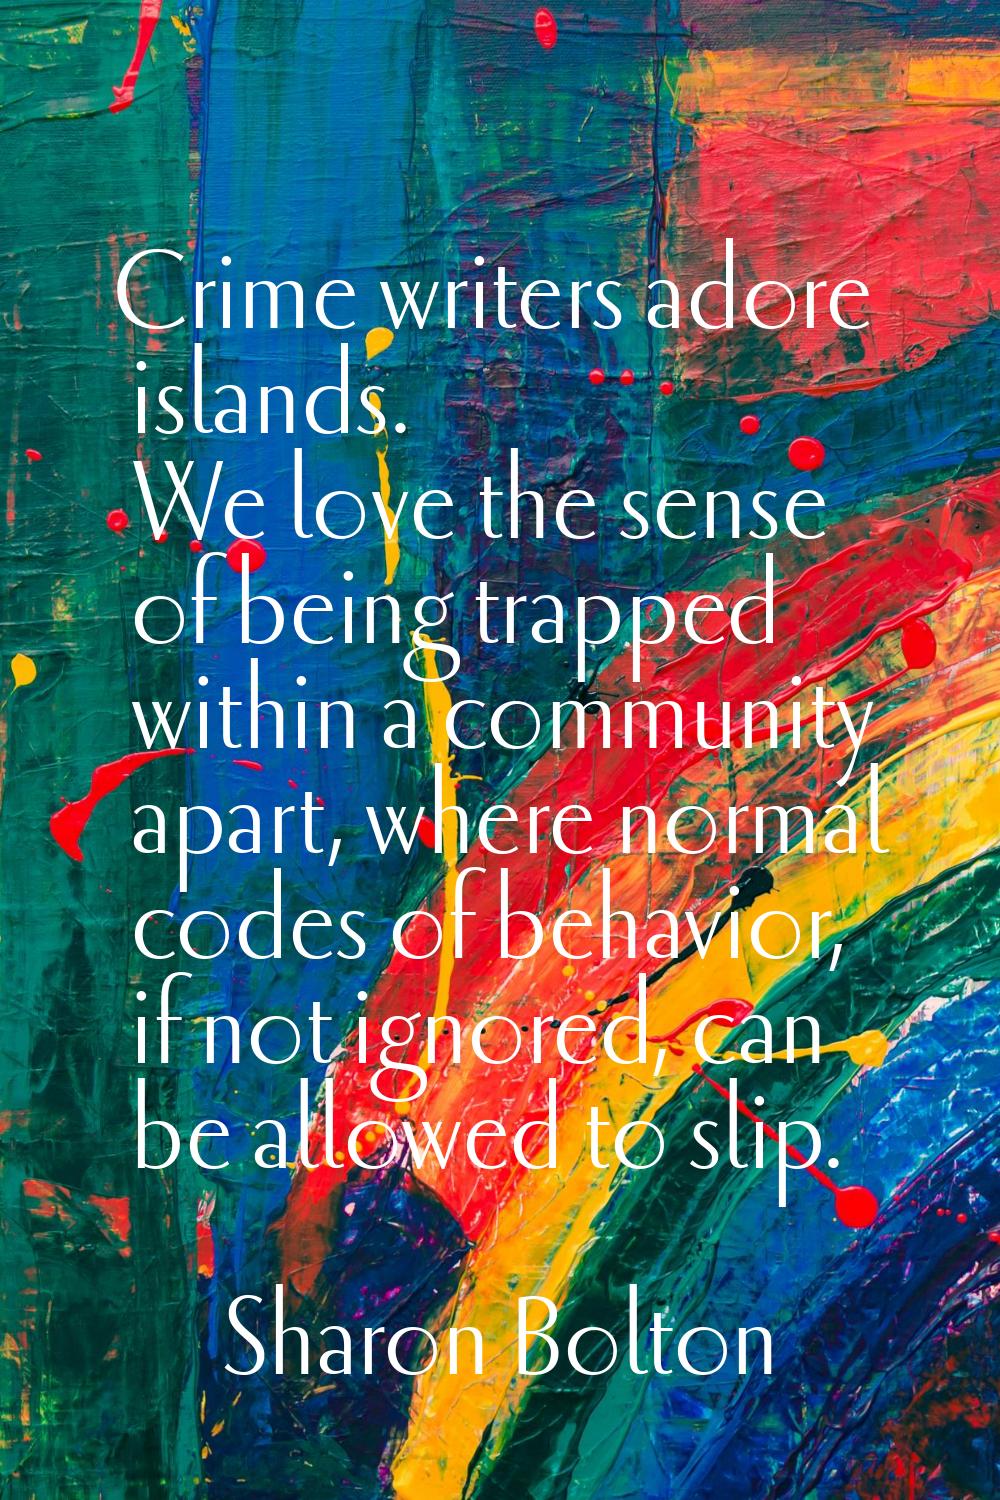 Crime writers adore islands. We love the sense of being trapped within a community apart, where nor